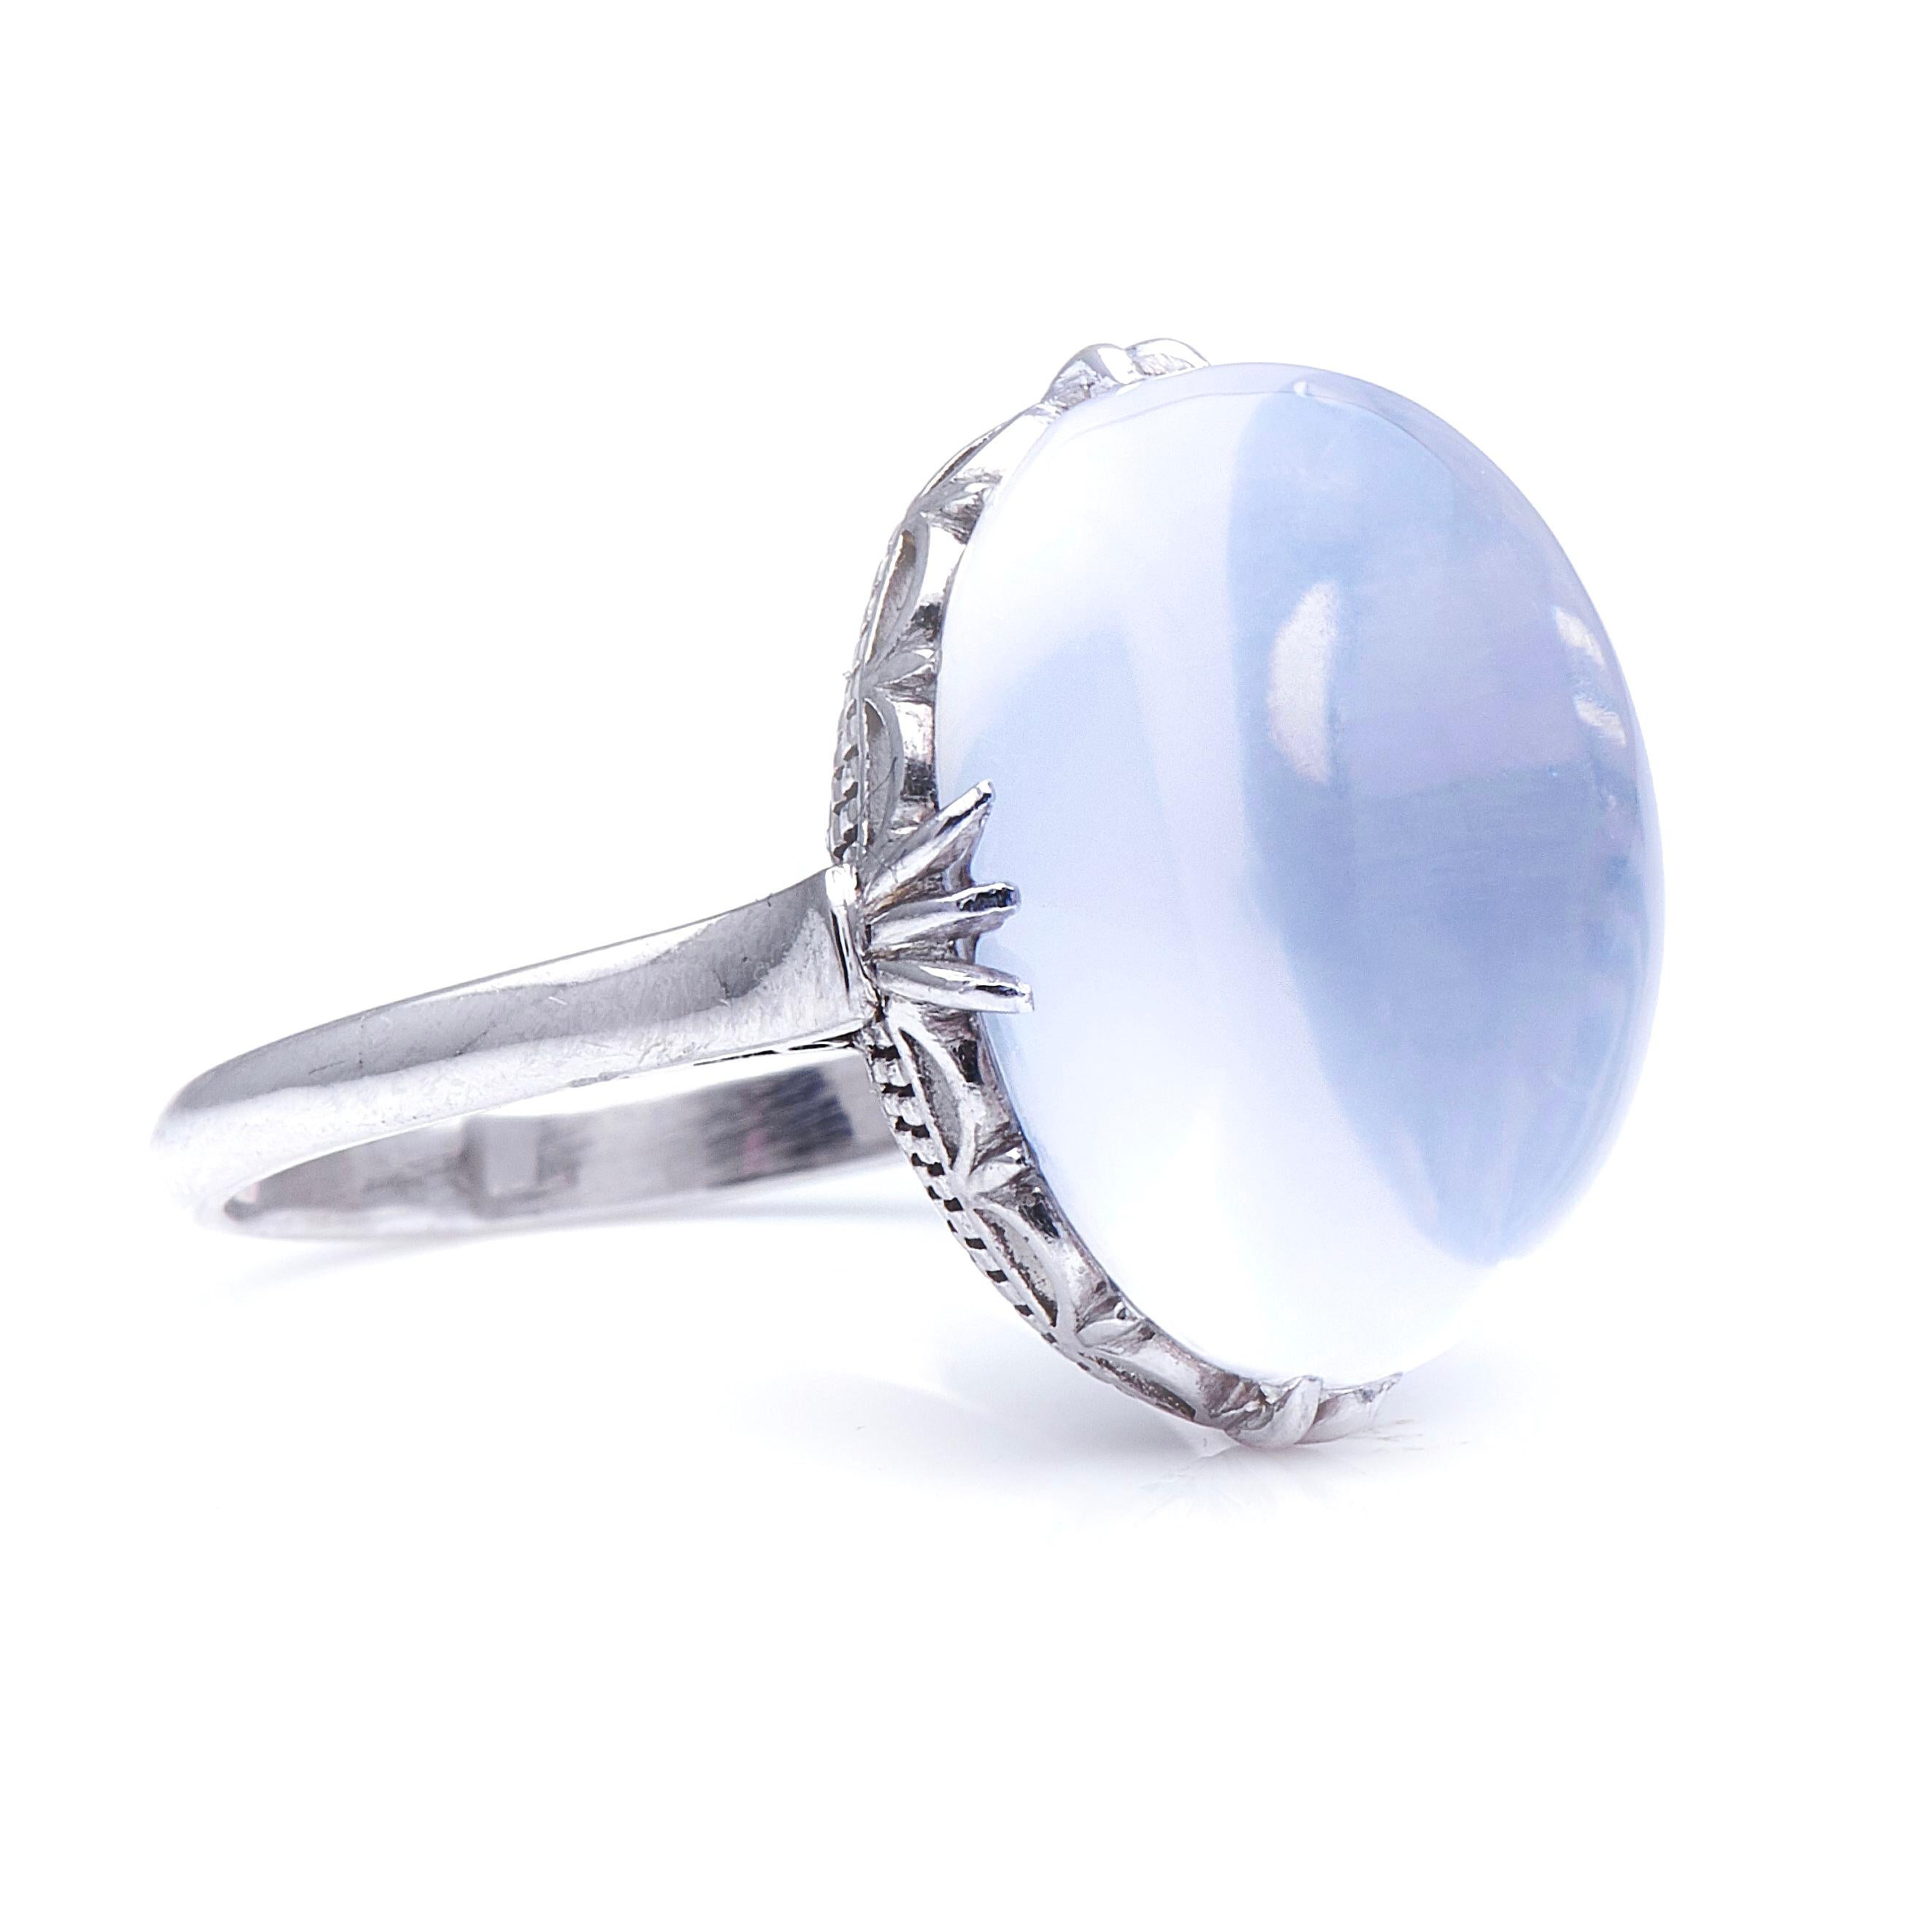 Moonstone ring, 20thcentury. This large moonstone cabochon, weighing approximately 12 carats, is unusual for its pure white colour, it which gives it a uniquely mystic, diaphanous appeal – a rather beautiful ethereal sheen.  Claw-set within a